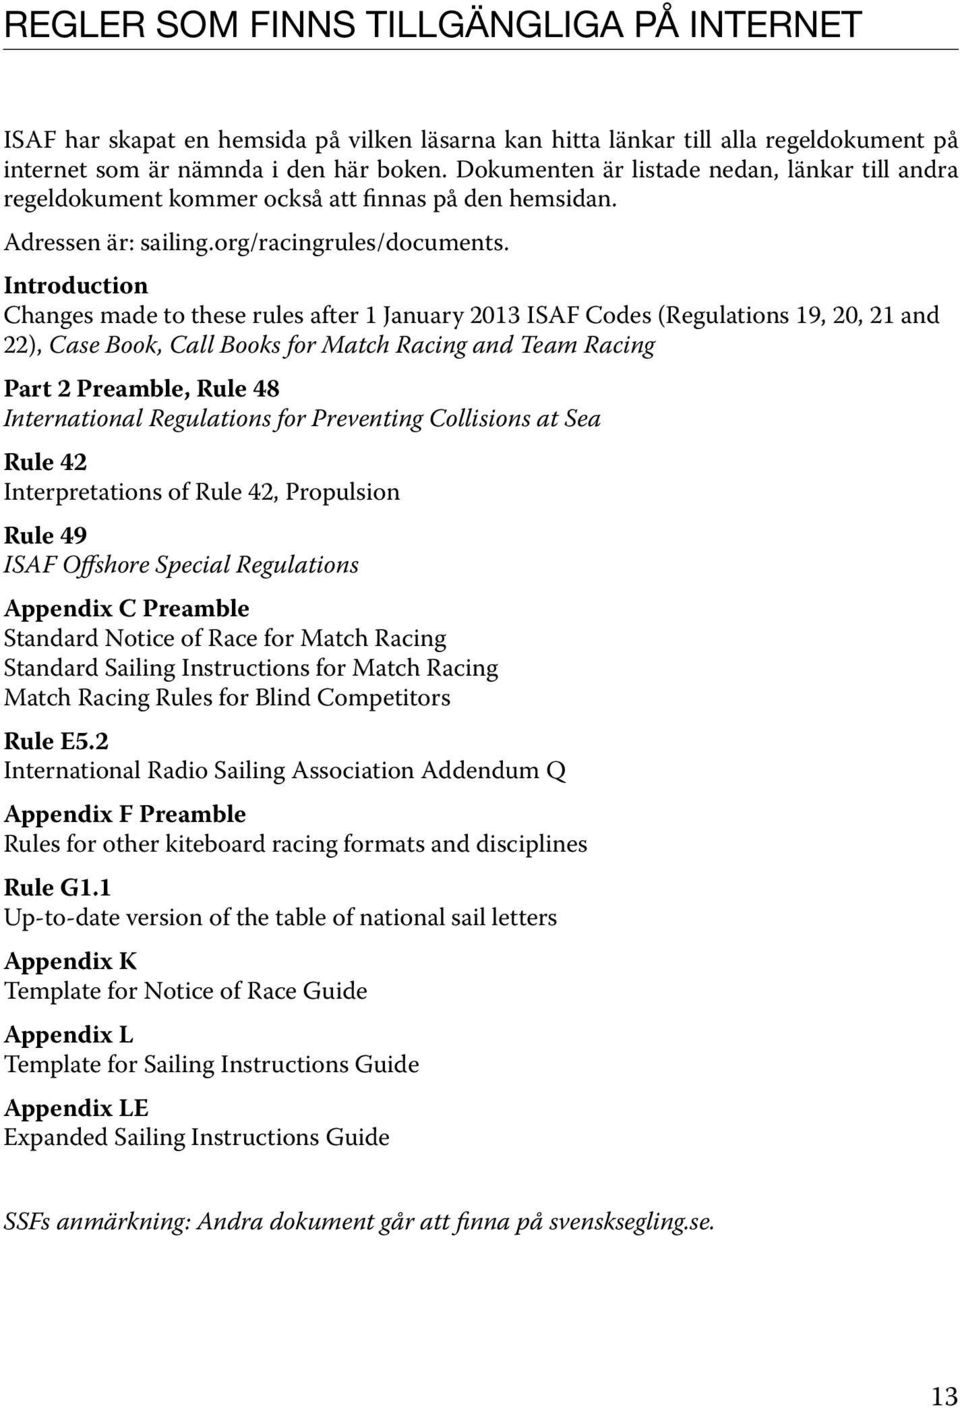 Introduction Changes made to these rules after 1 January 2013 ISAF Codes (Regulations 19, 20, 21 and 22), Case Book, Call Books for Match Racing and Team Racing Part 2 Preamble, Rule 48 International